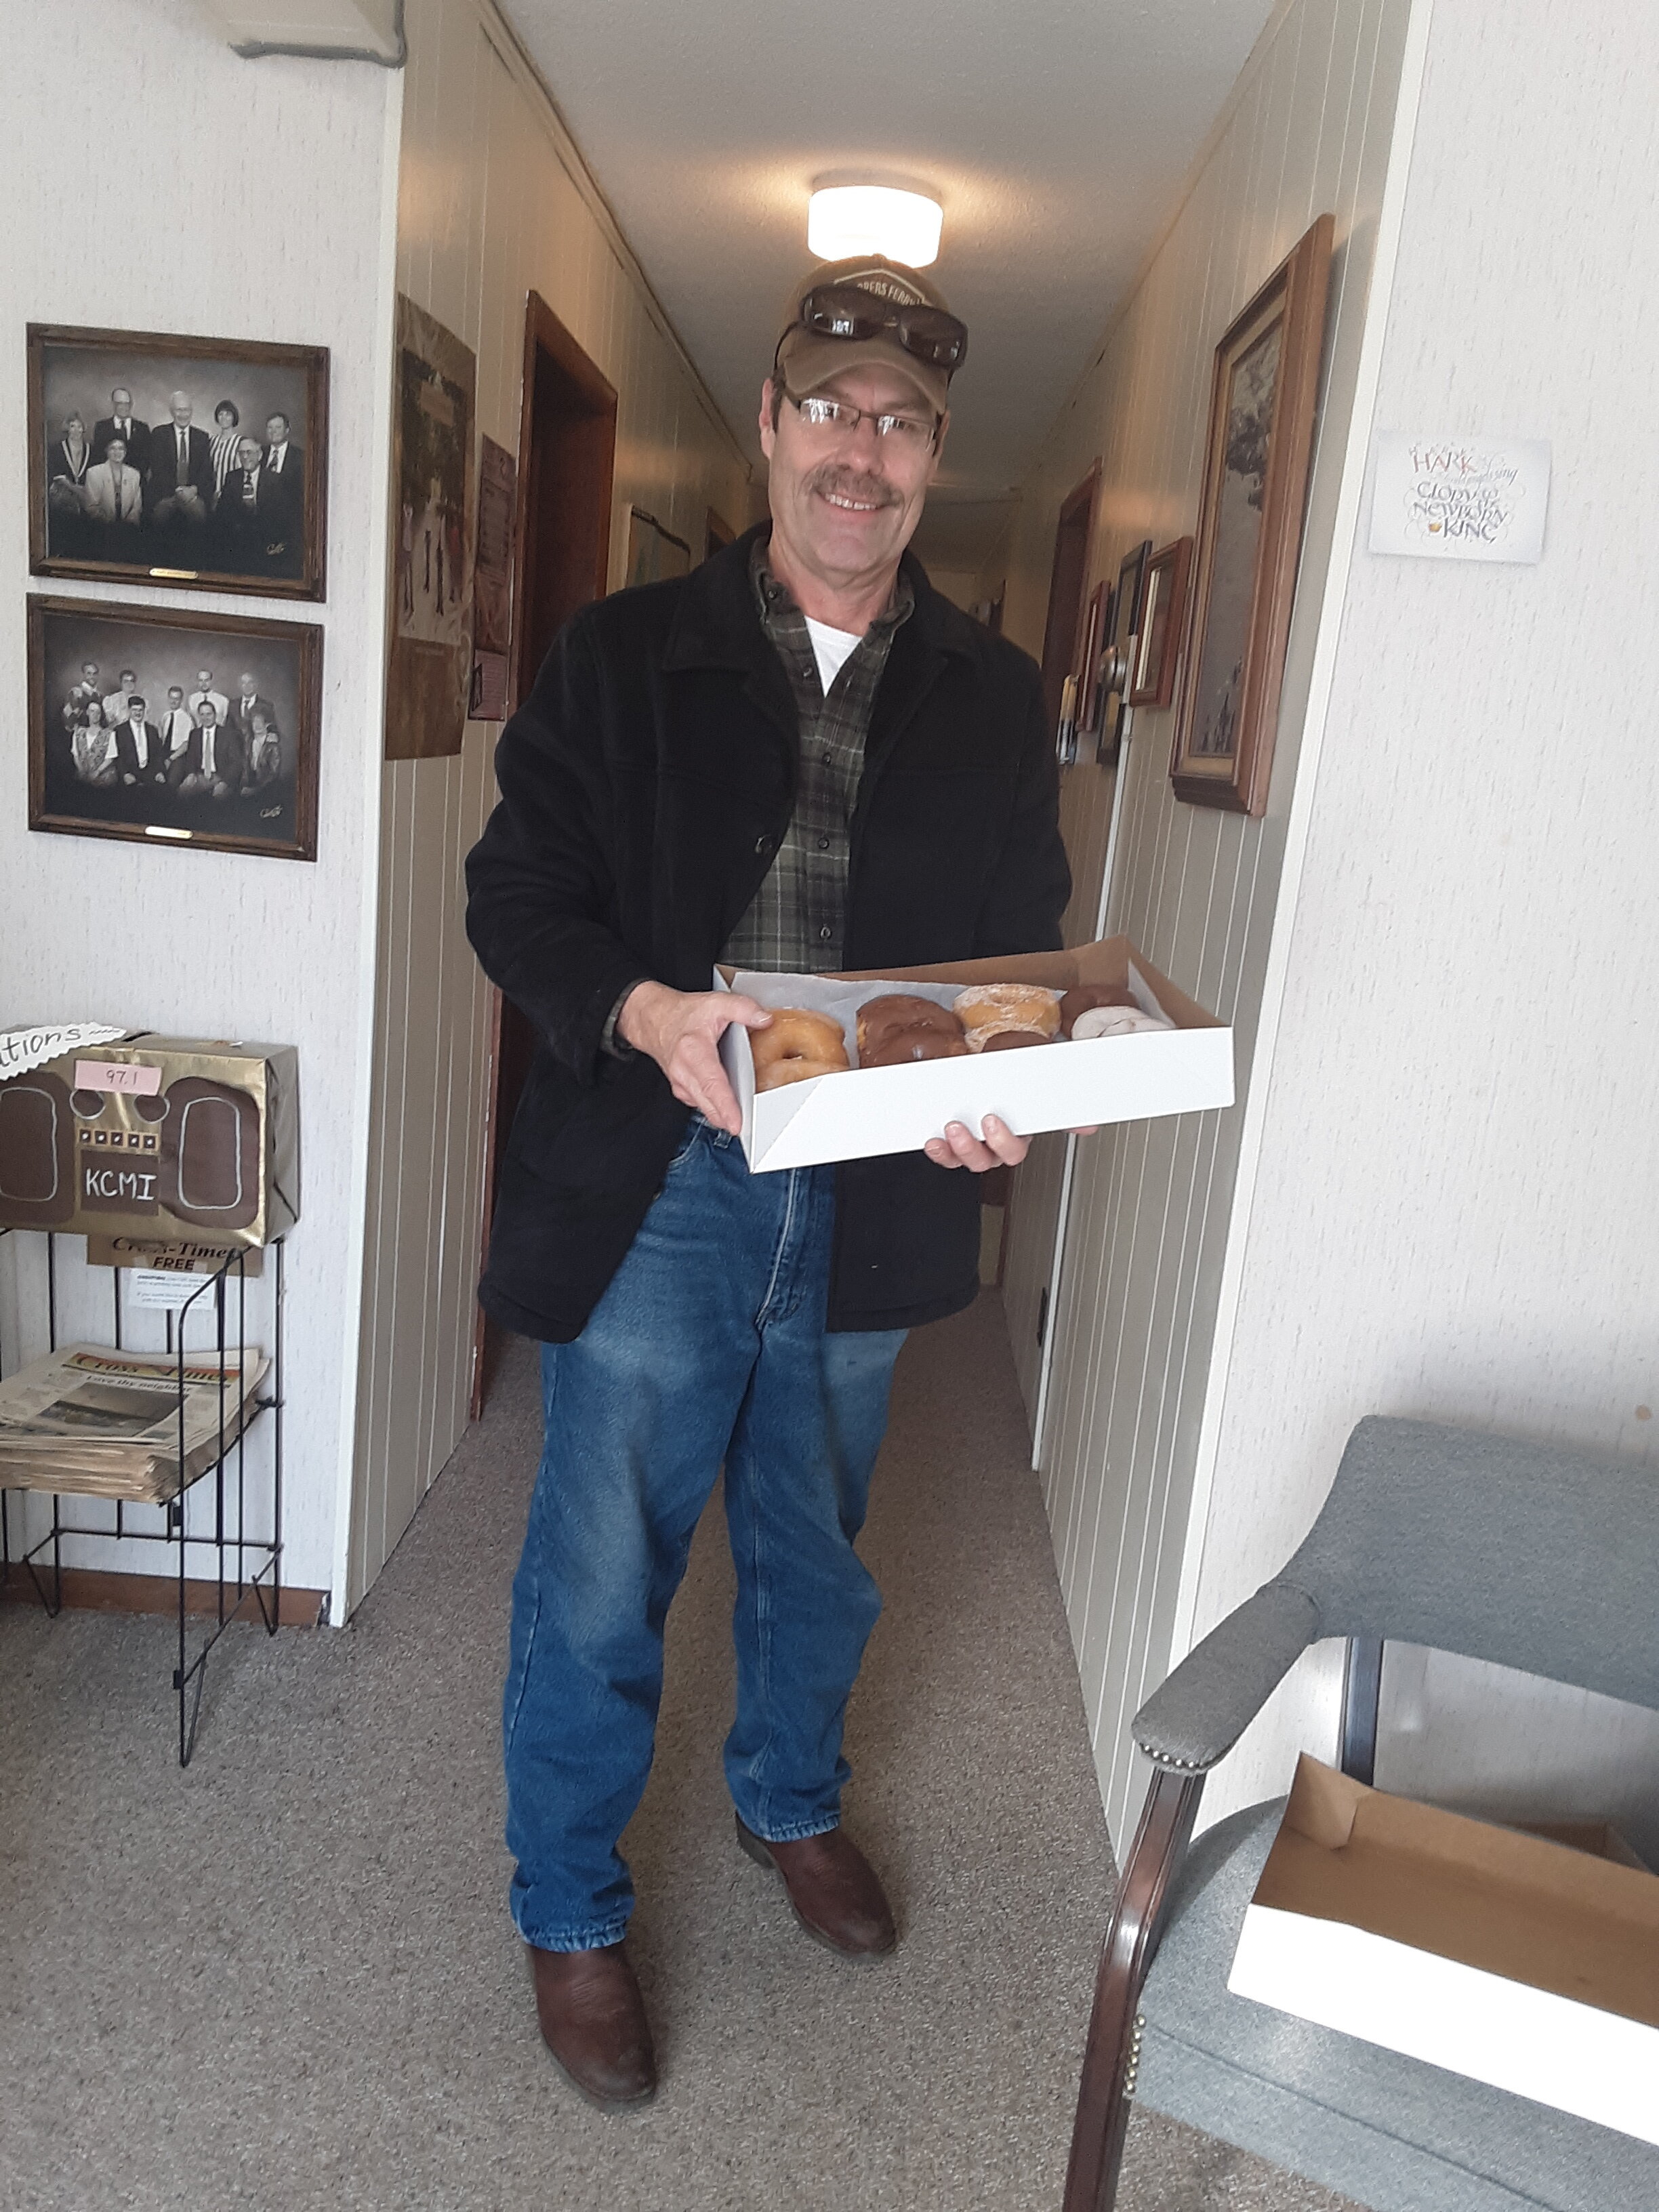  Pastor Scott Clark, of Scottsbluff Berean Church, picks up his donuts as part of our 12 Donuts of Christmas promotion. 